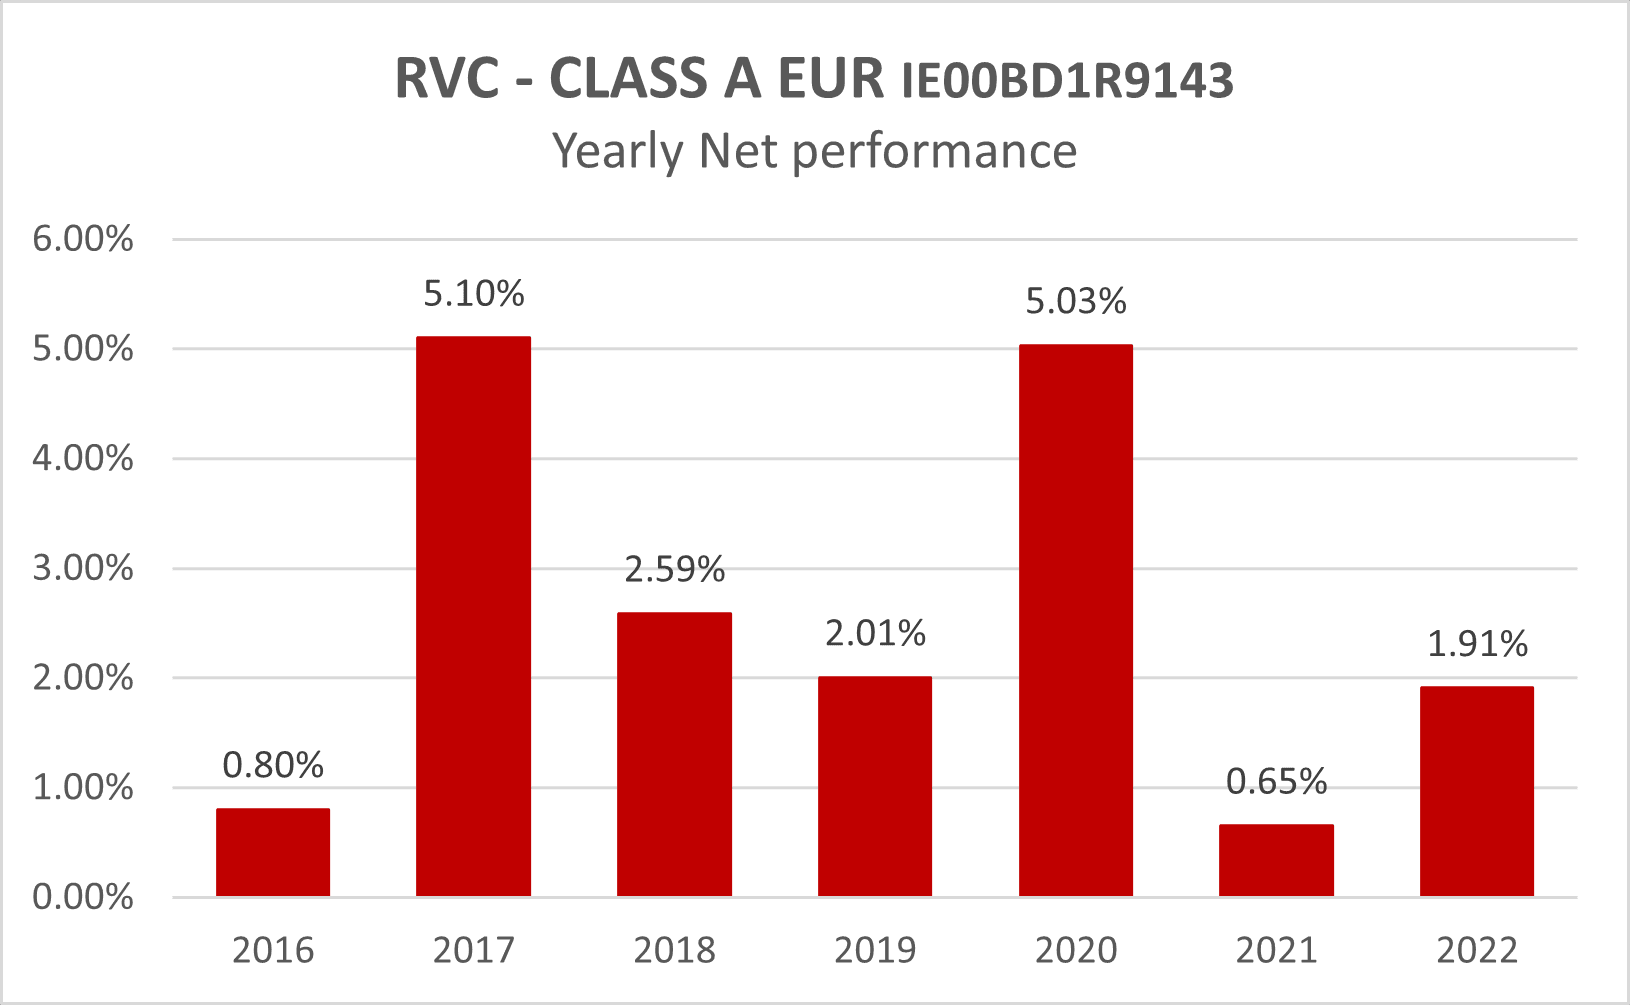 RVC - CLASS A EUR IE00BD1R9143 - Yearly Net performance